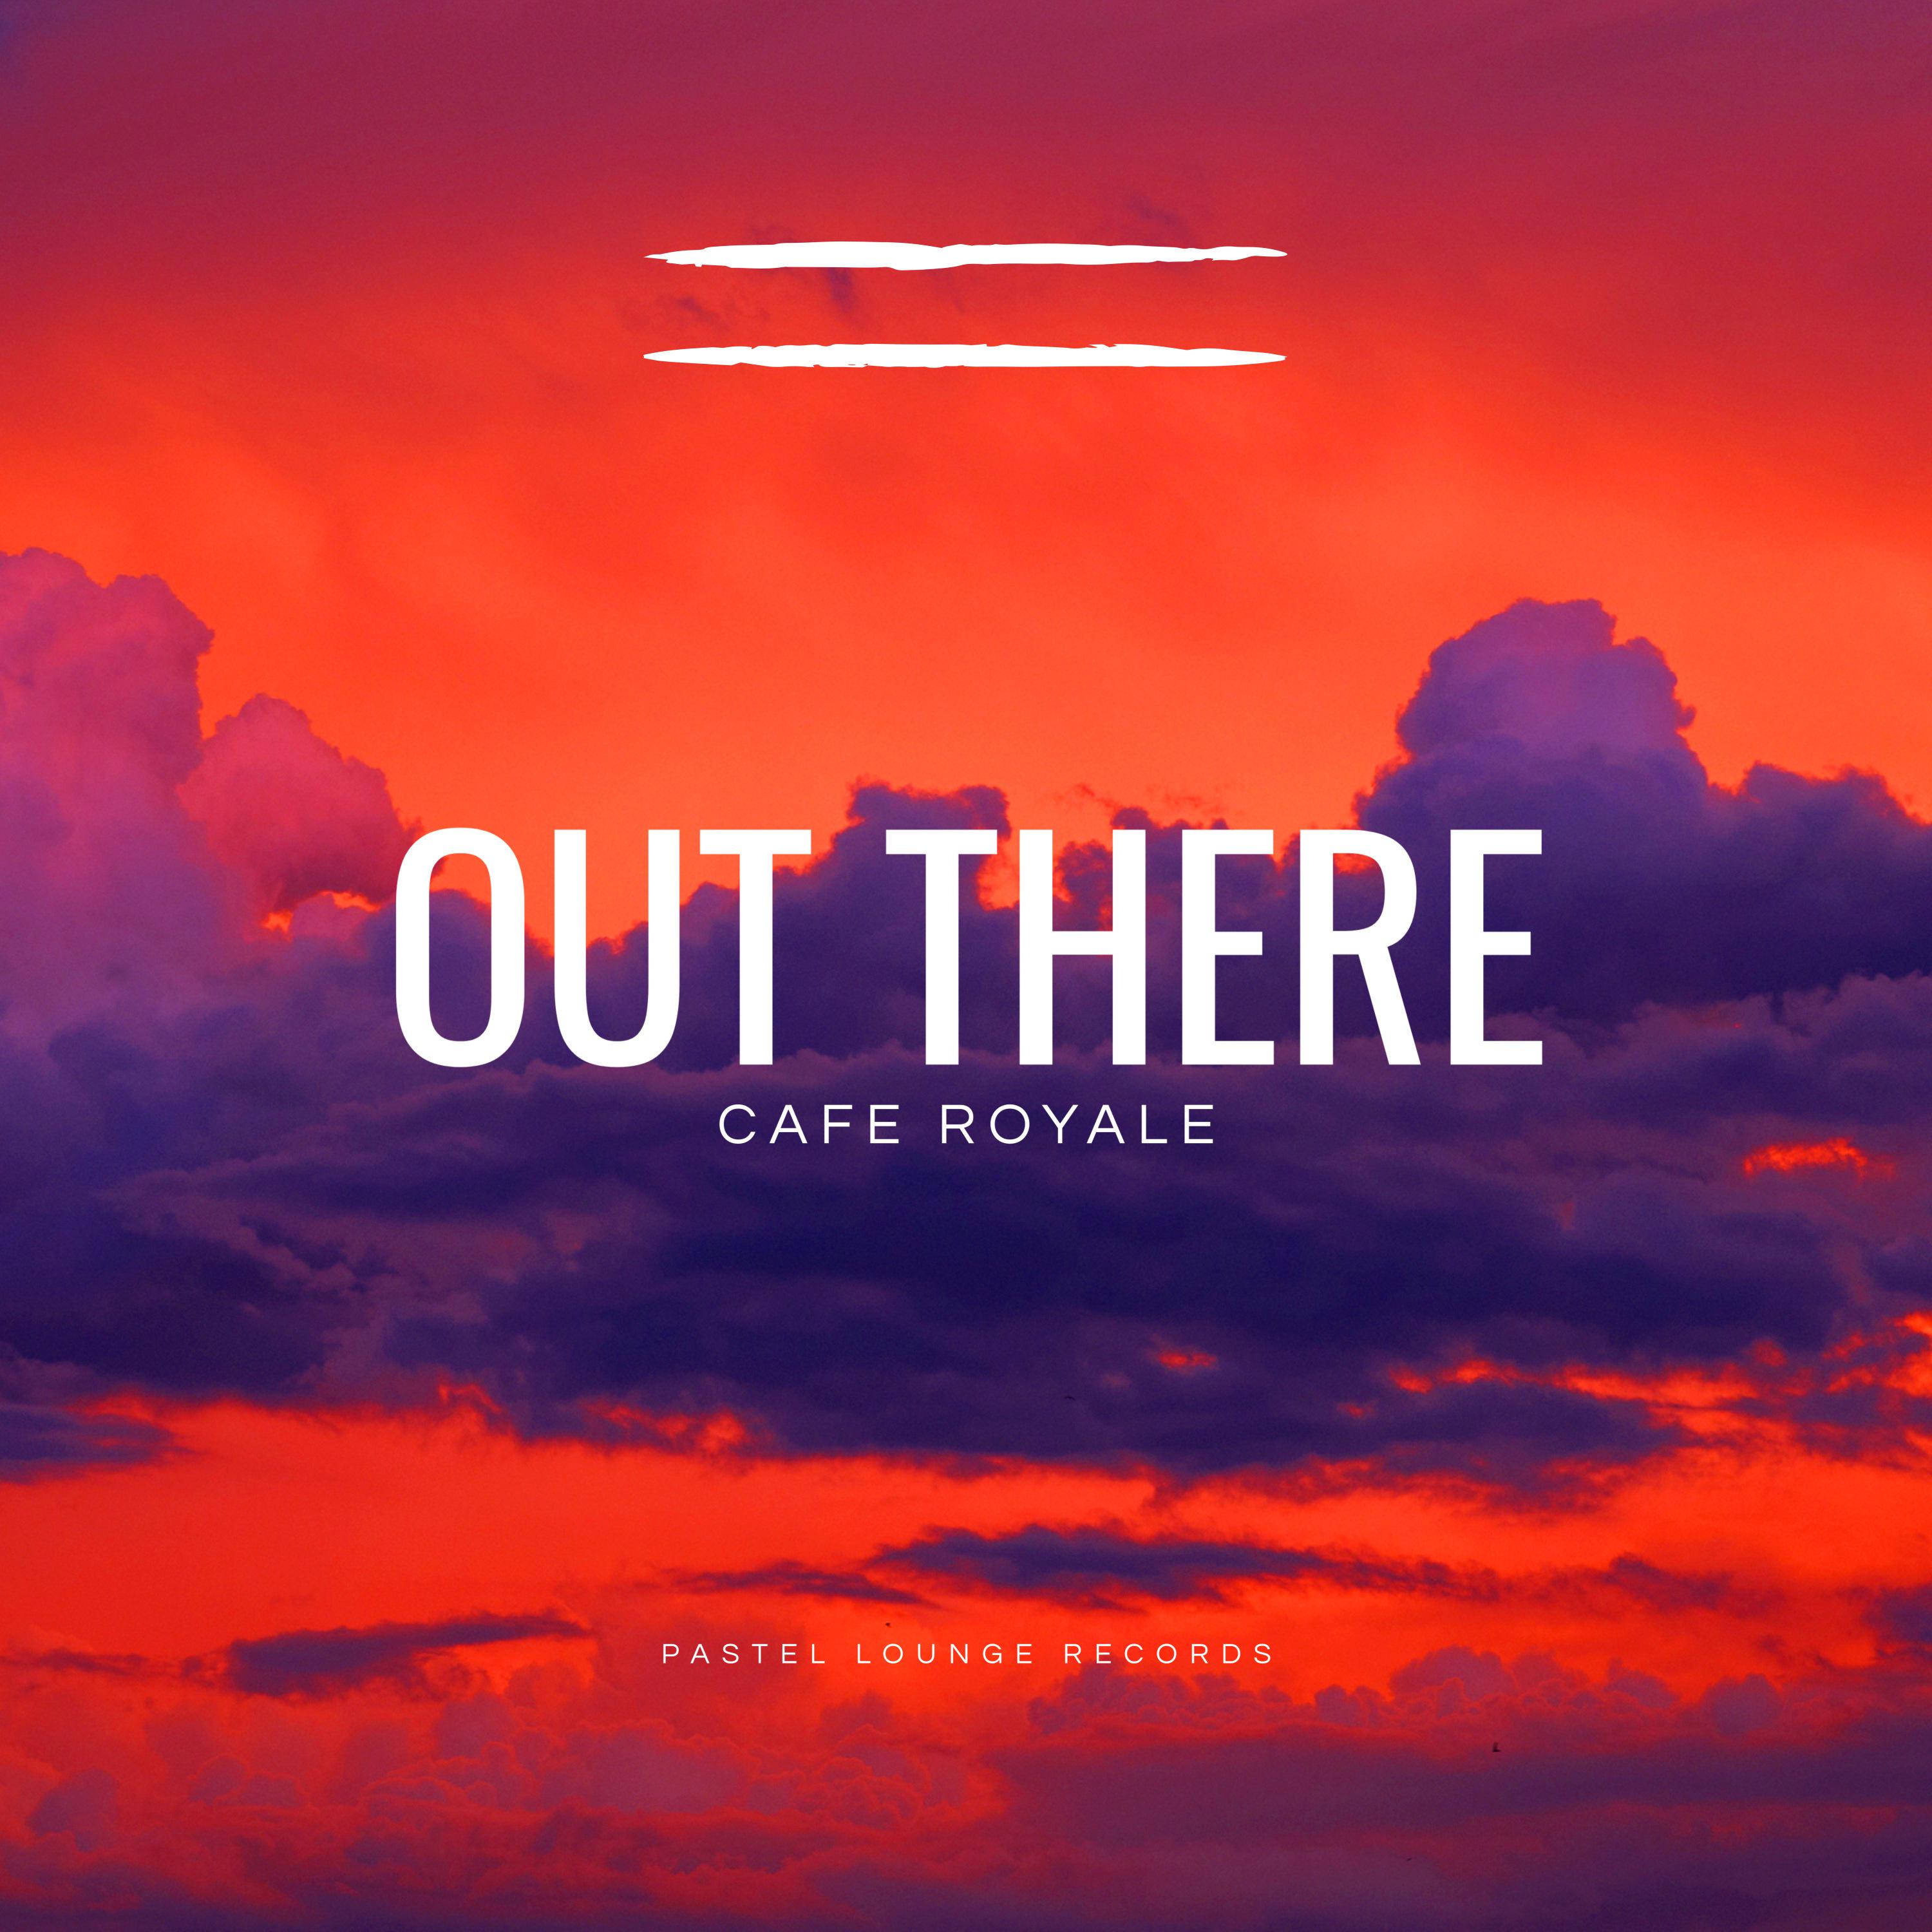 Cafe Royale - Out There